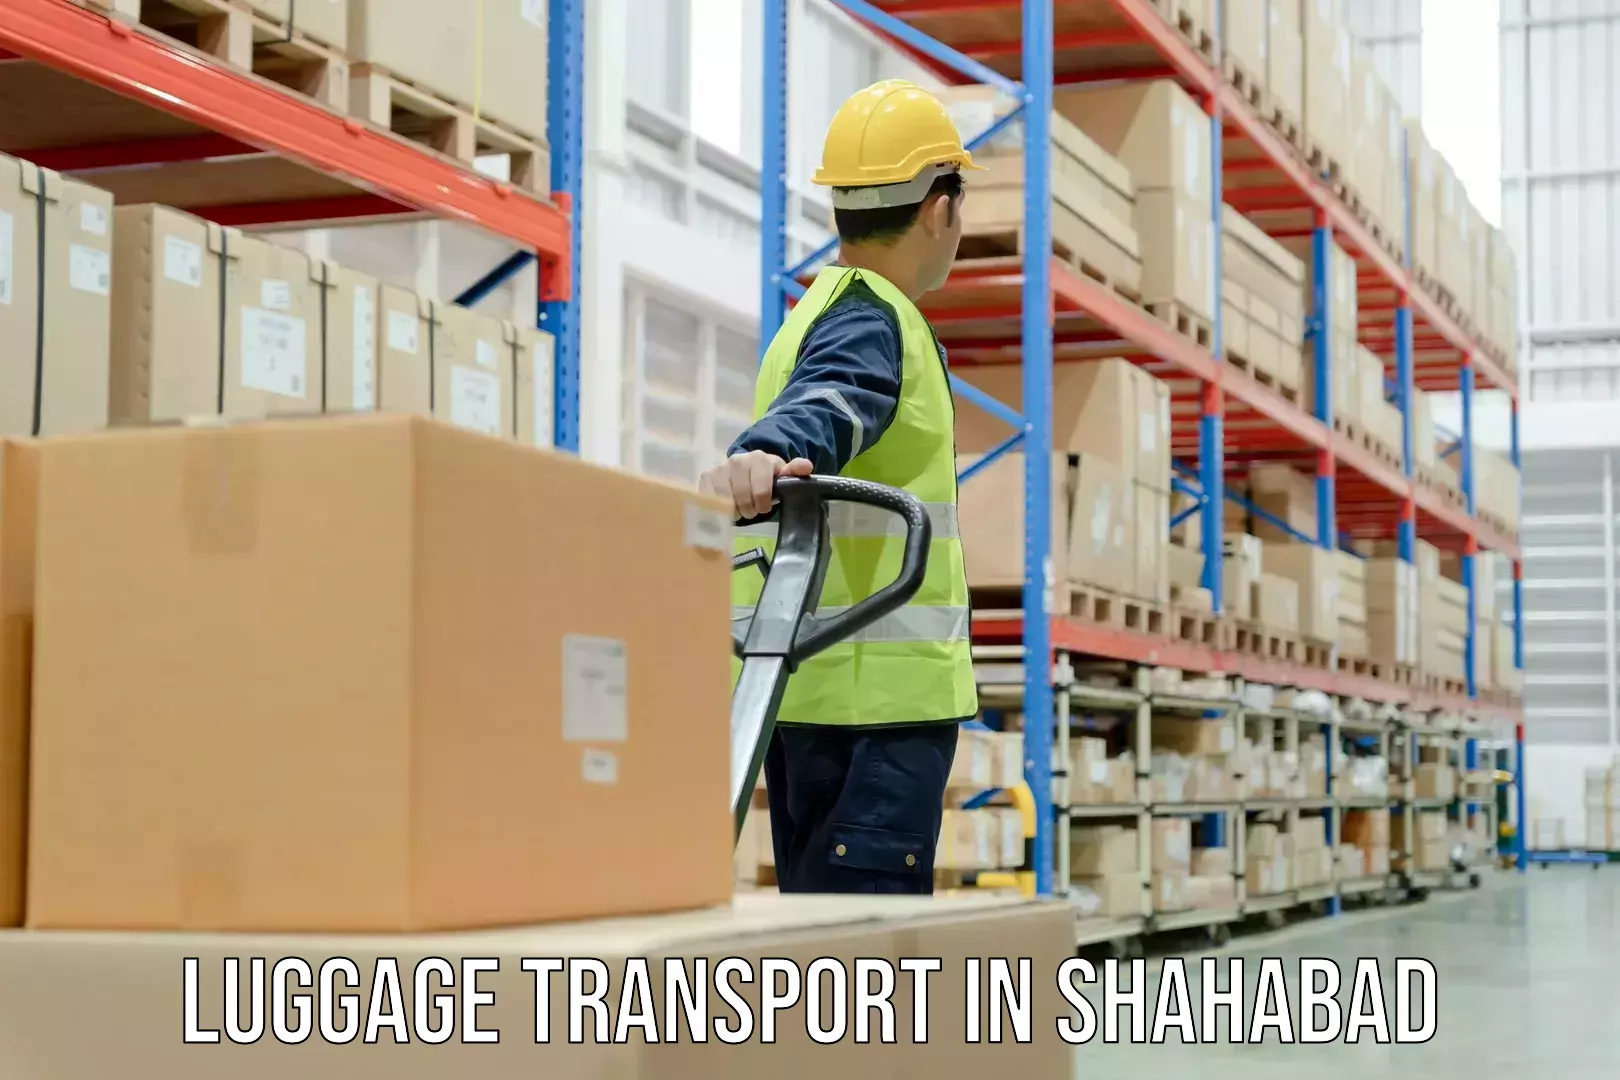 Baggage shipping experience in Shahabad